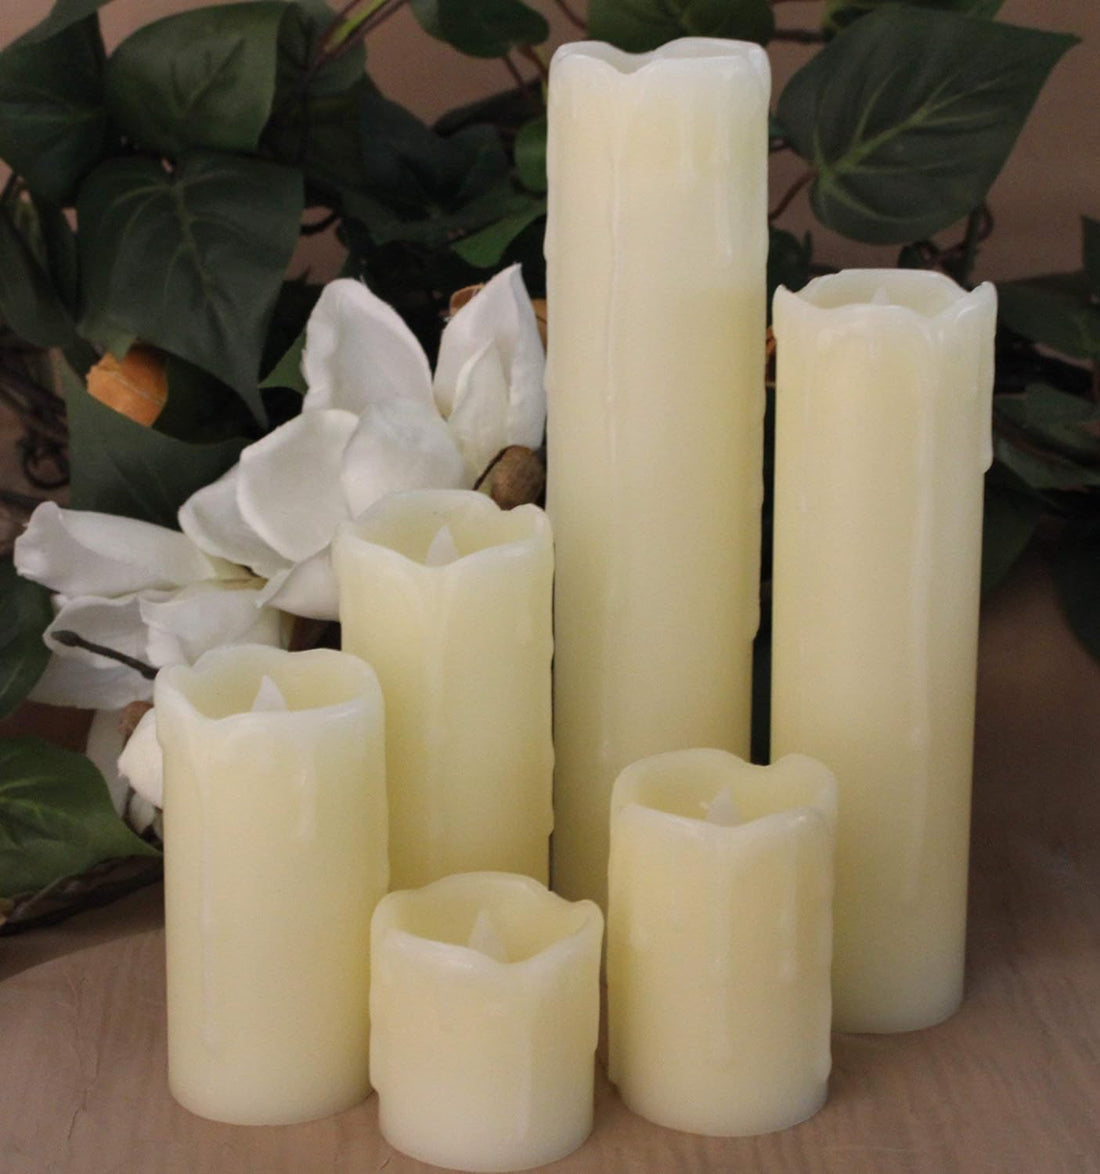 SALE!! LED Lytes TIMER FLAMELESS CANDLES, SLIM Set of 6, 2" WIDE and 2"- 9" TALL, Ivory Color Wax and Flickering Amber Yellow Flame for Thanksgiving Decorations, Halloween Parties and gifts